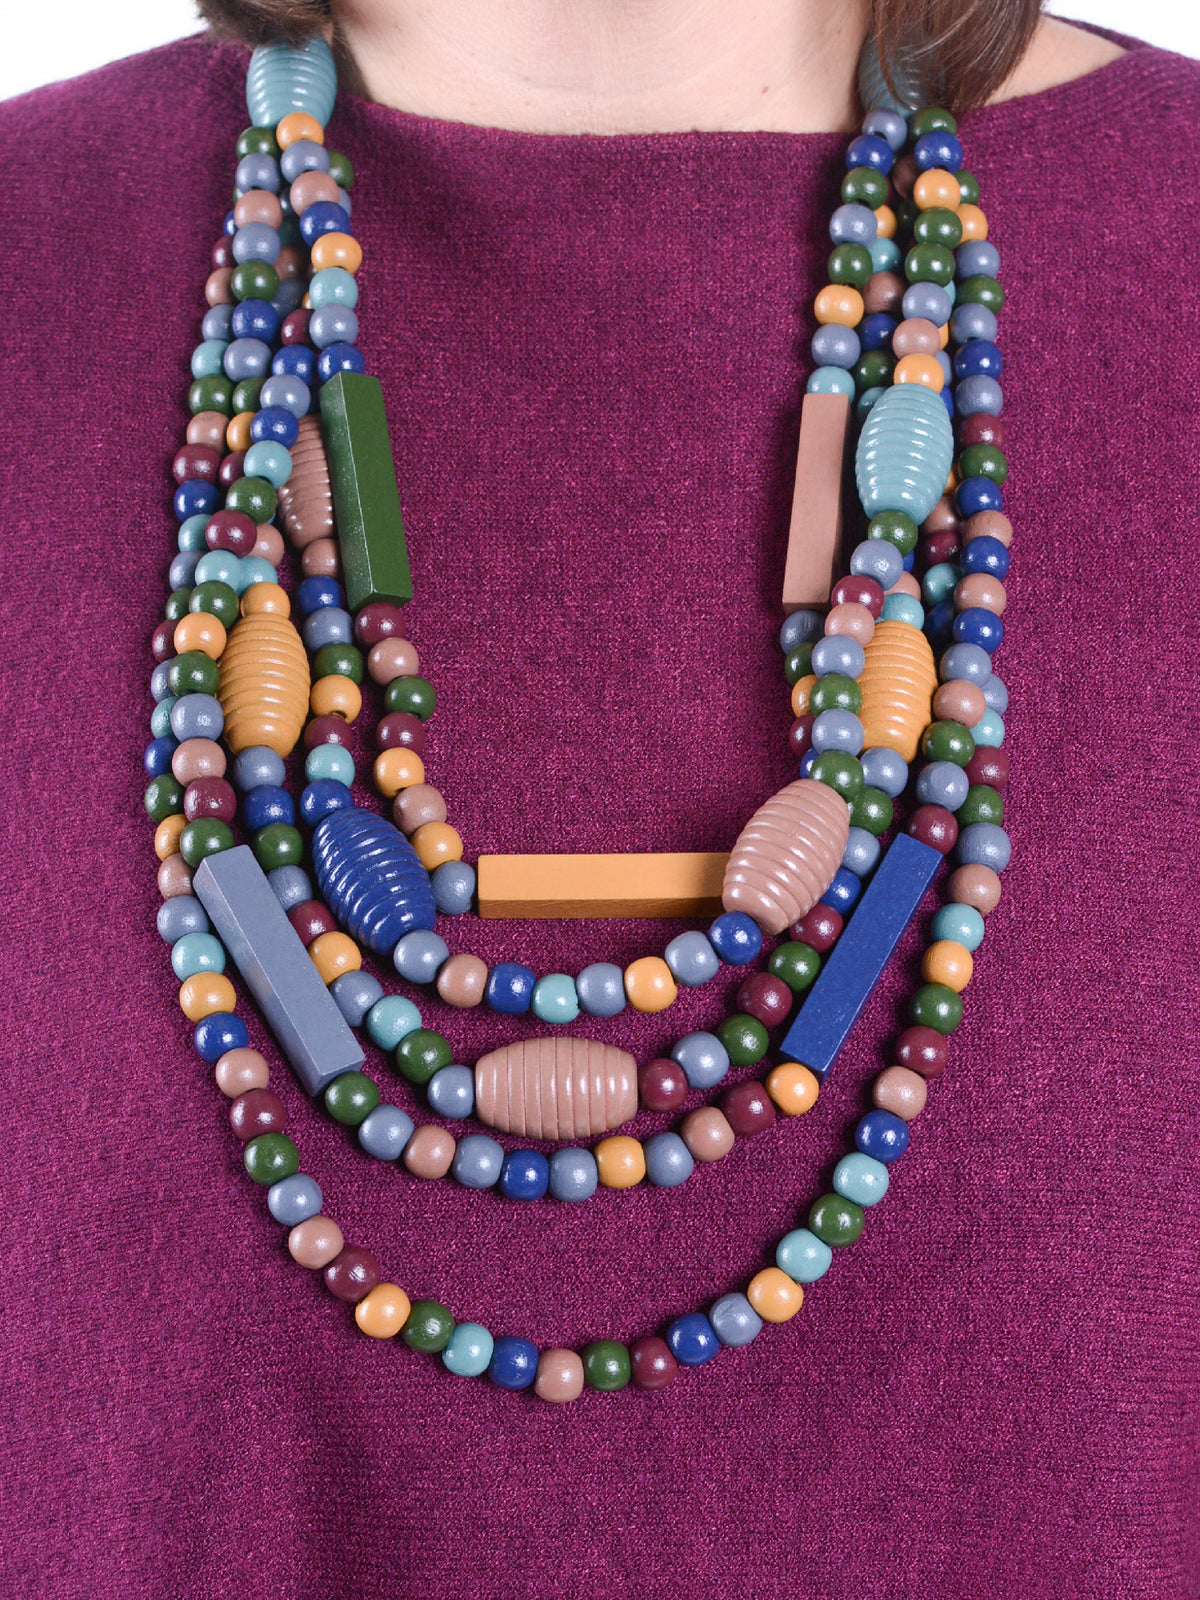 Lagenlook Earthy Beads Necklace - LAGEN02, Necklaces & Pendants, Pure Plus Clothing, Lagenlook Clothing, Plus Size Fashion, Over 50 Fashion